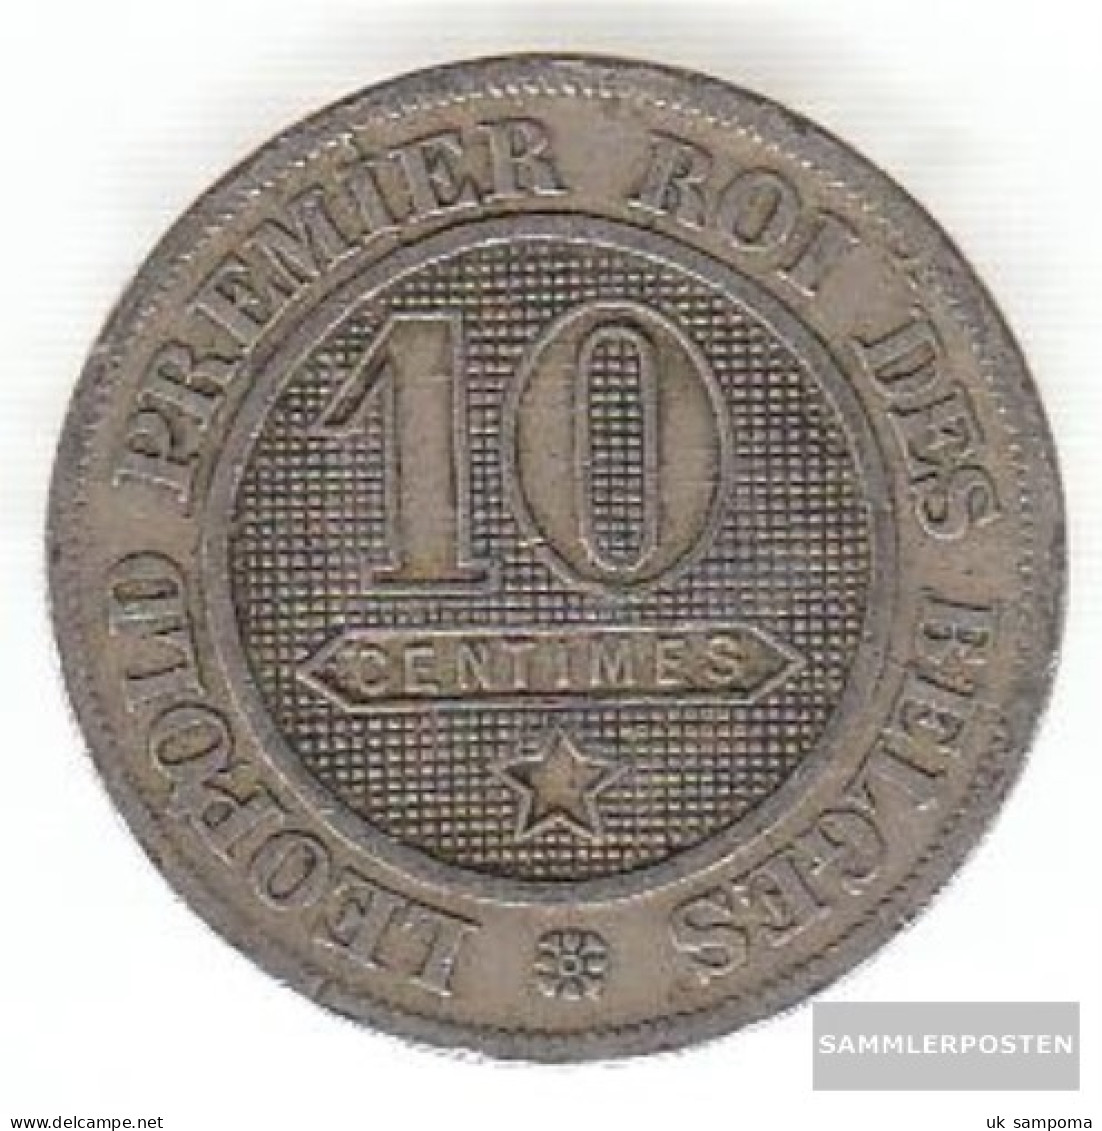 Belgium Km-number. : 22 1862 Extremely Fine Copper-Nickel Extremely Fine 1862 10 Centines Leo In District - 10 Centimes